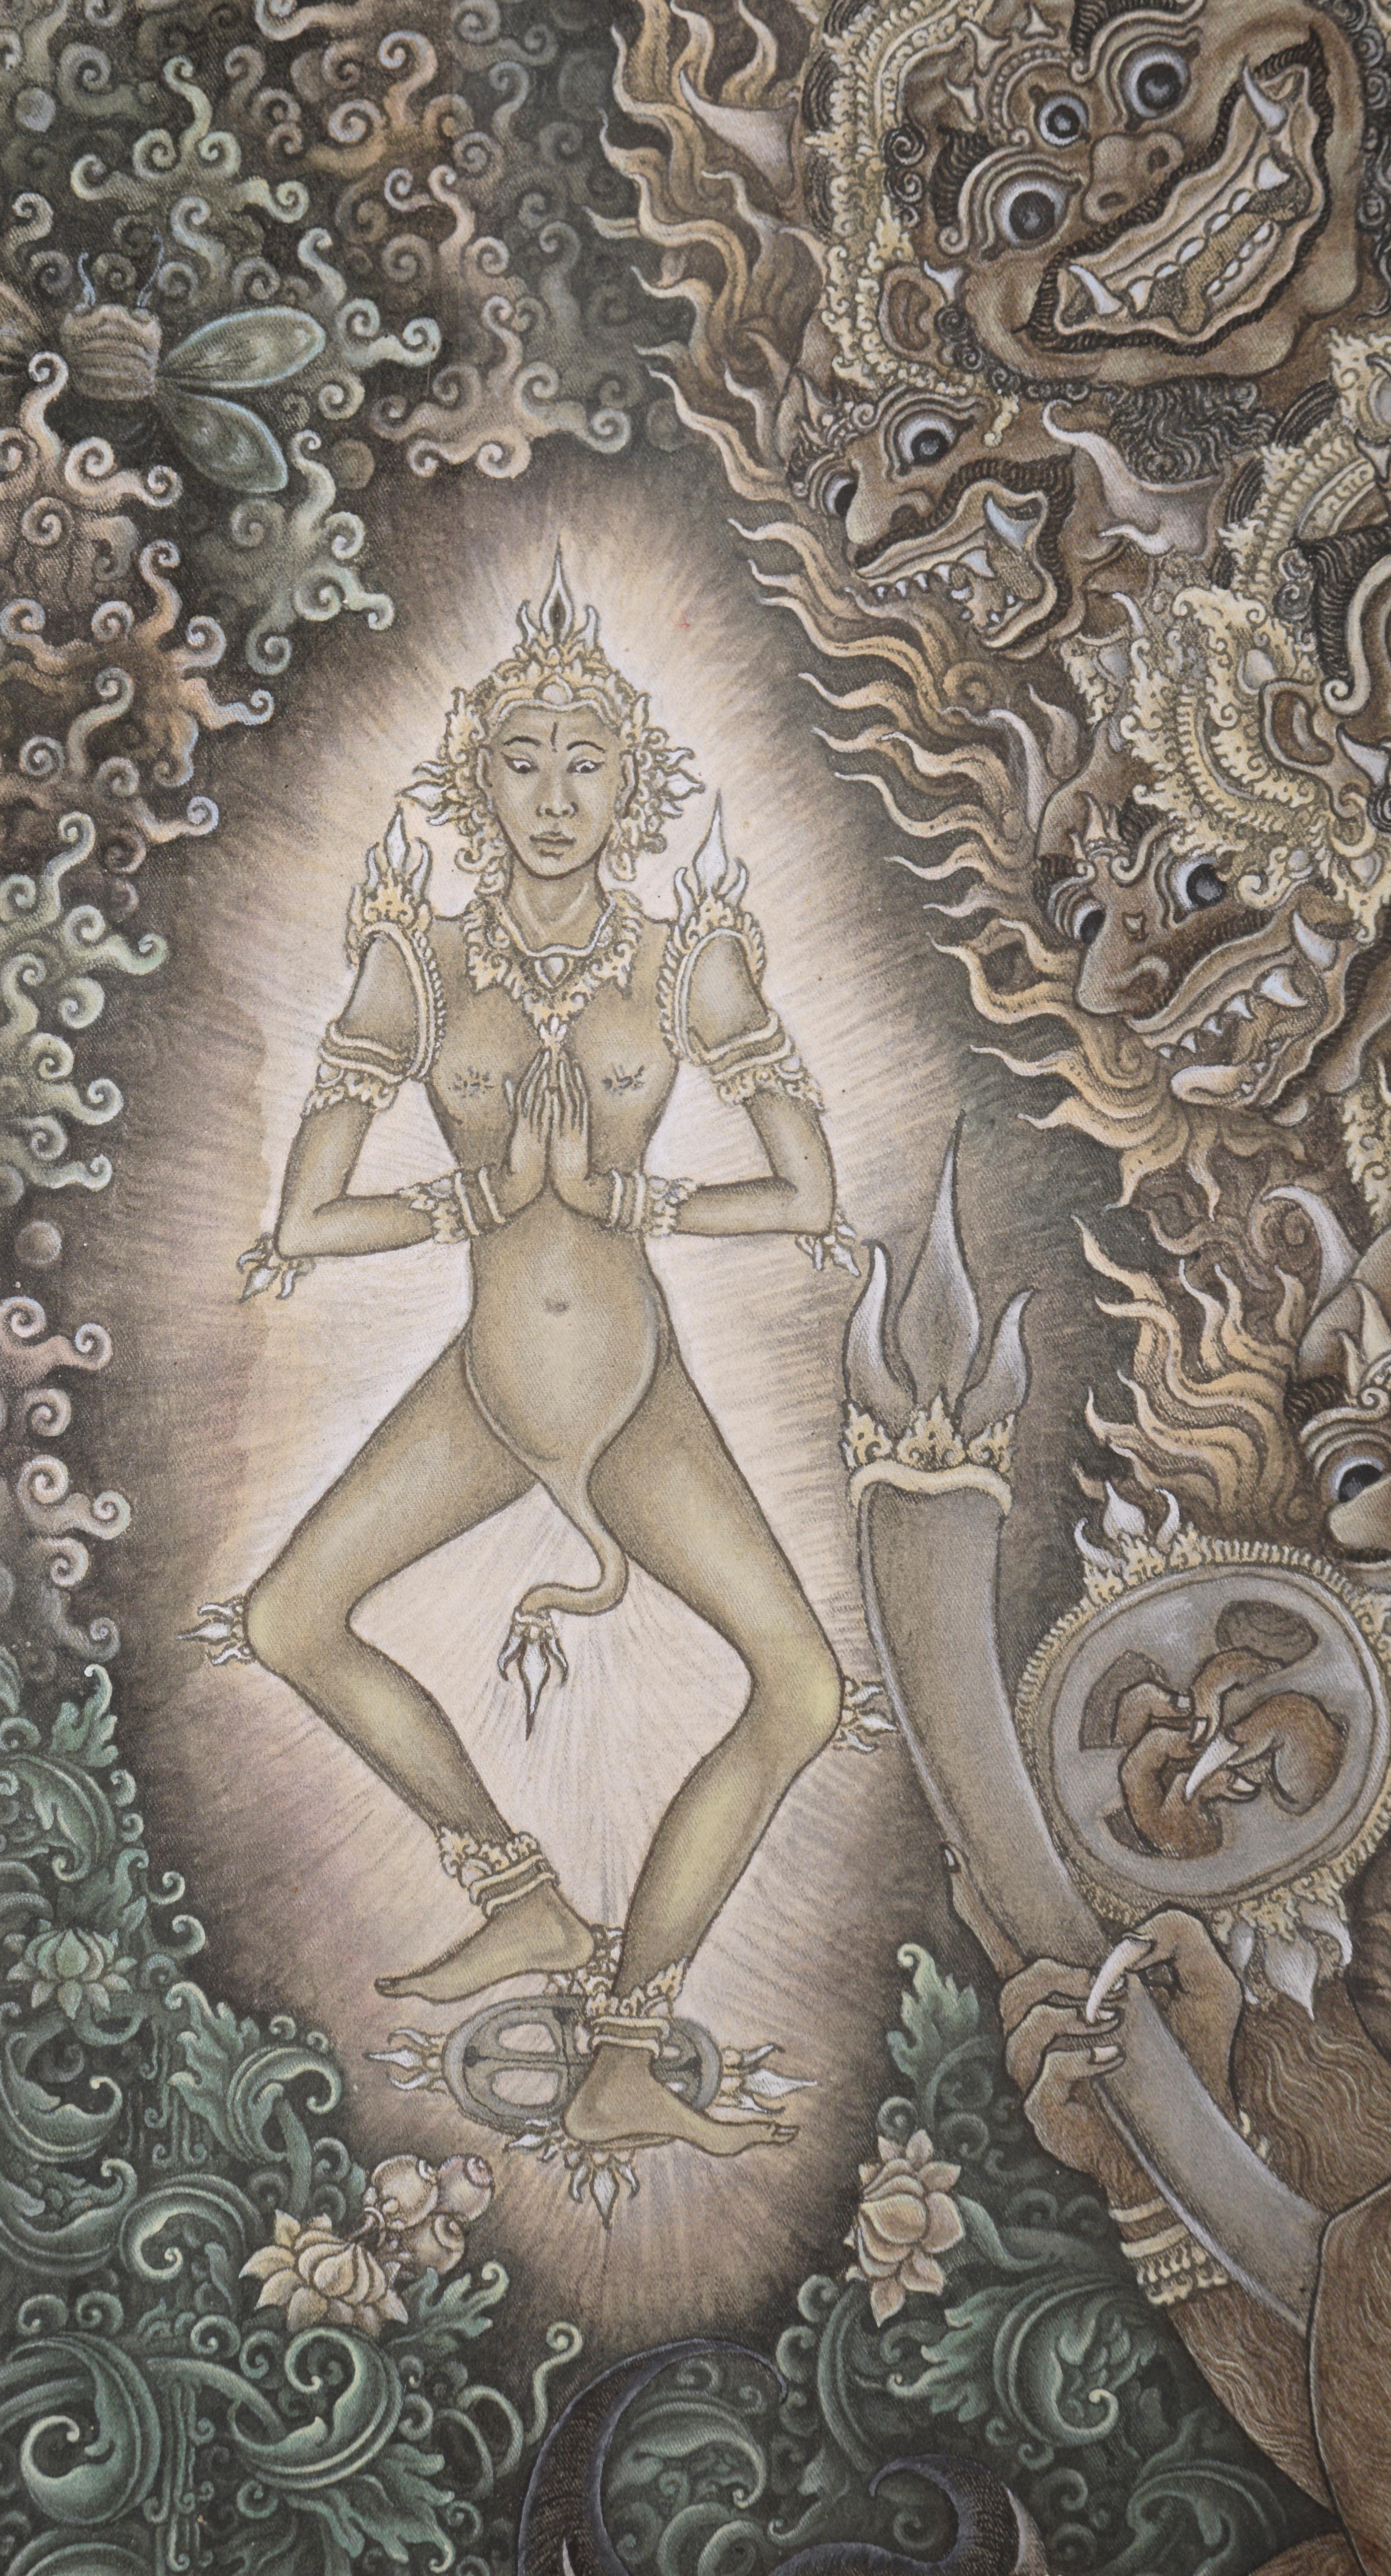 The Goddess Kali Appears to a Hunter - Balinese Ubud Painting Mask Dance - Gray Figurative Painting by Konci